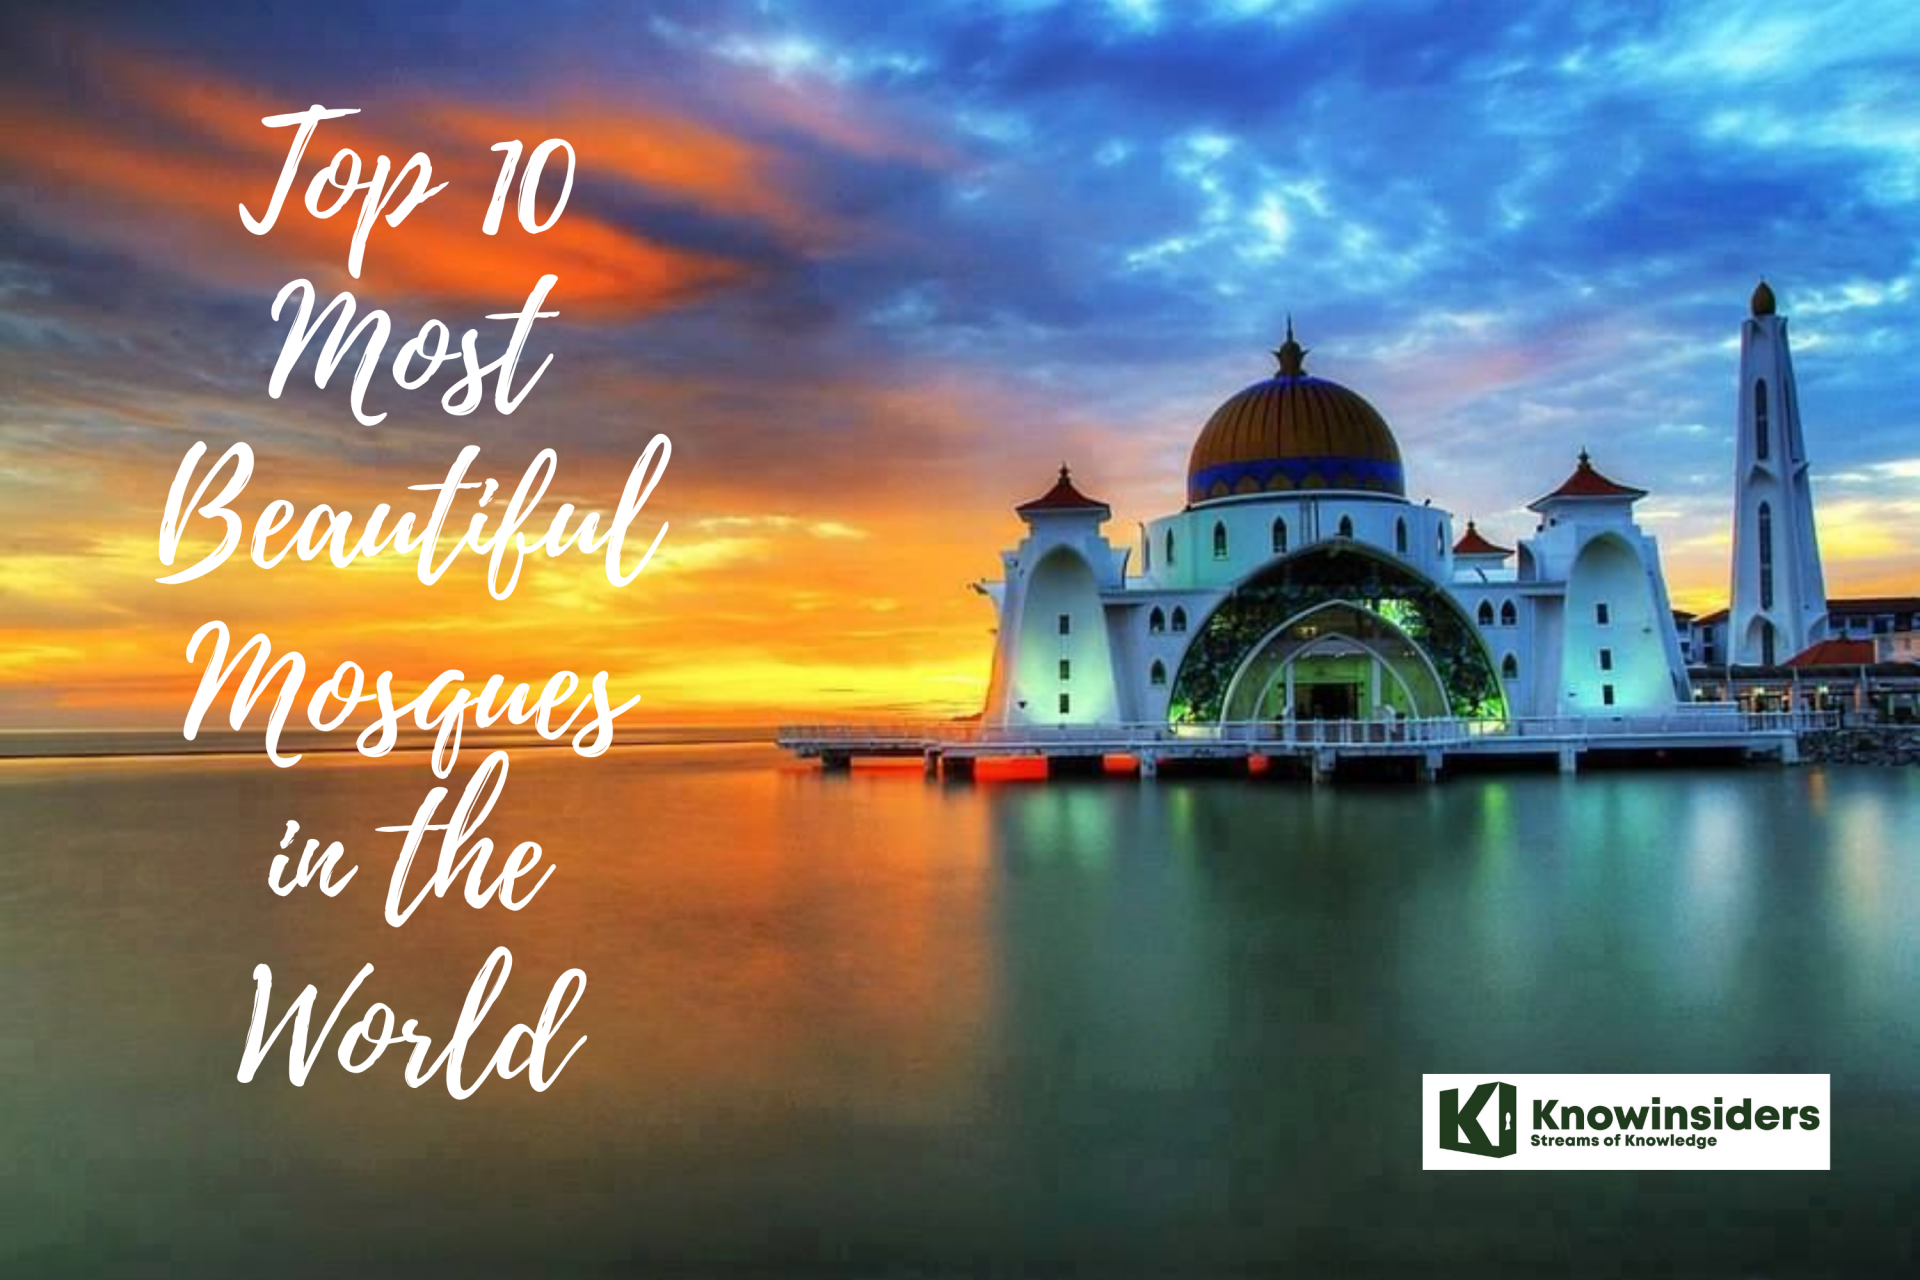 Top 10 Most Beautiful Mosques in the World